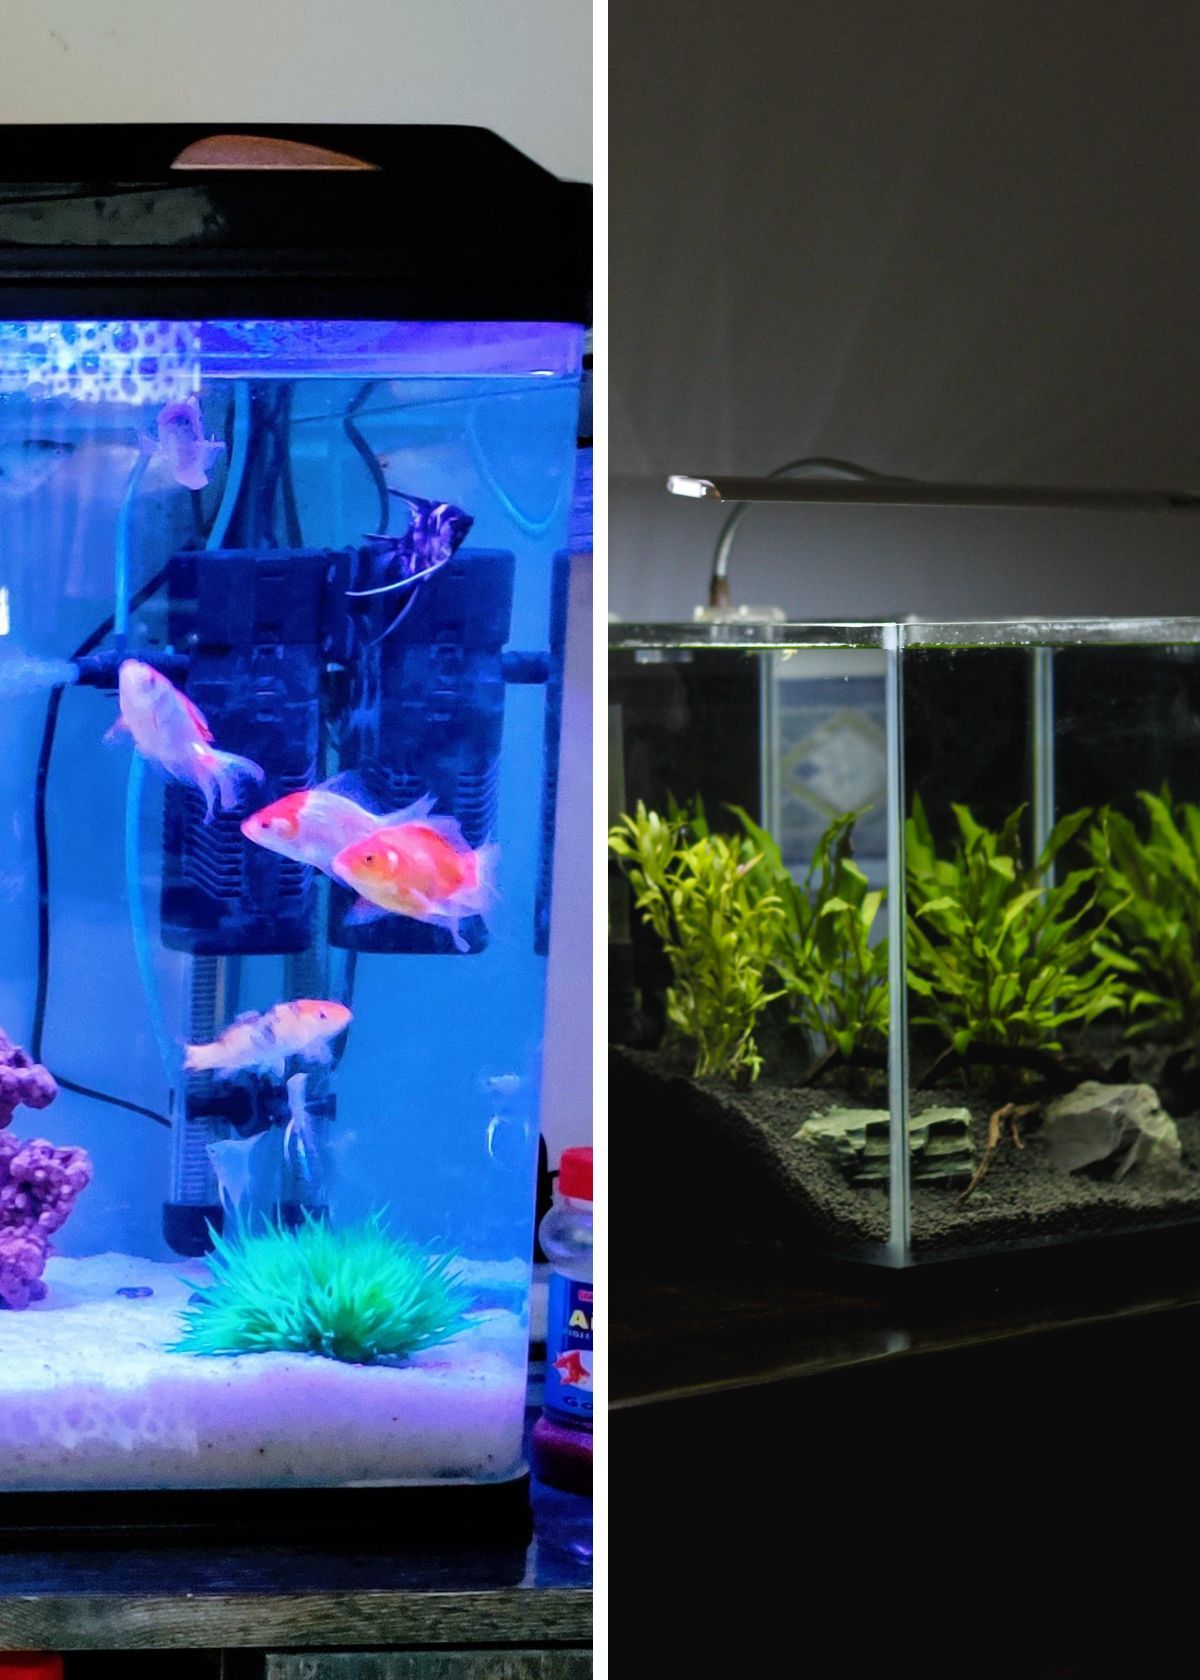 Dive Into Crystal Clear Waters With The Top 5 Aquarium Filters!